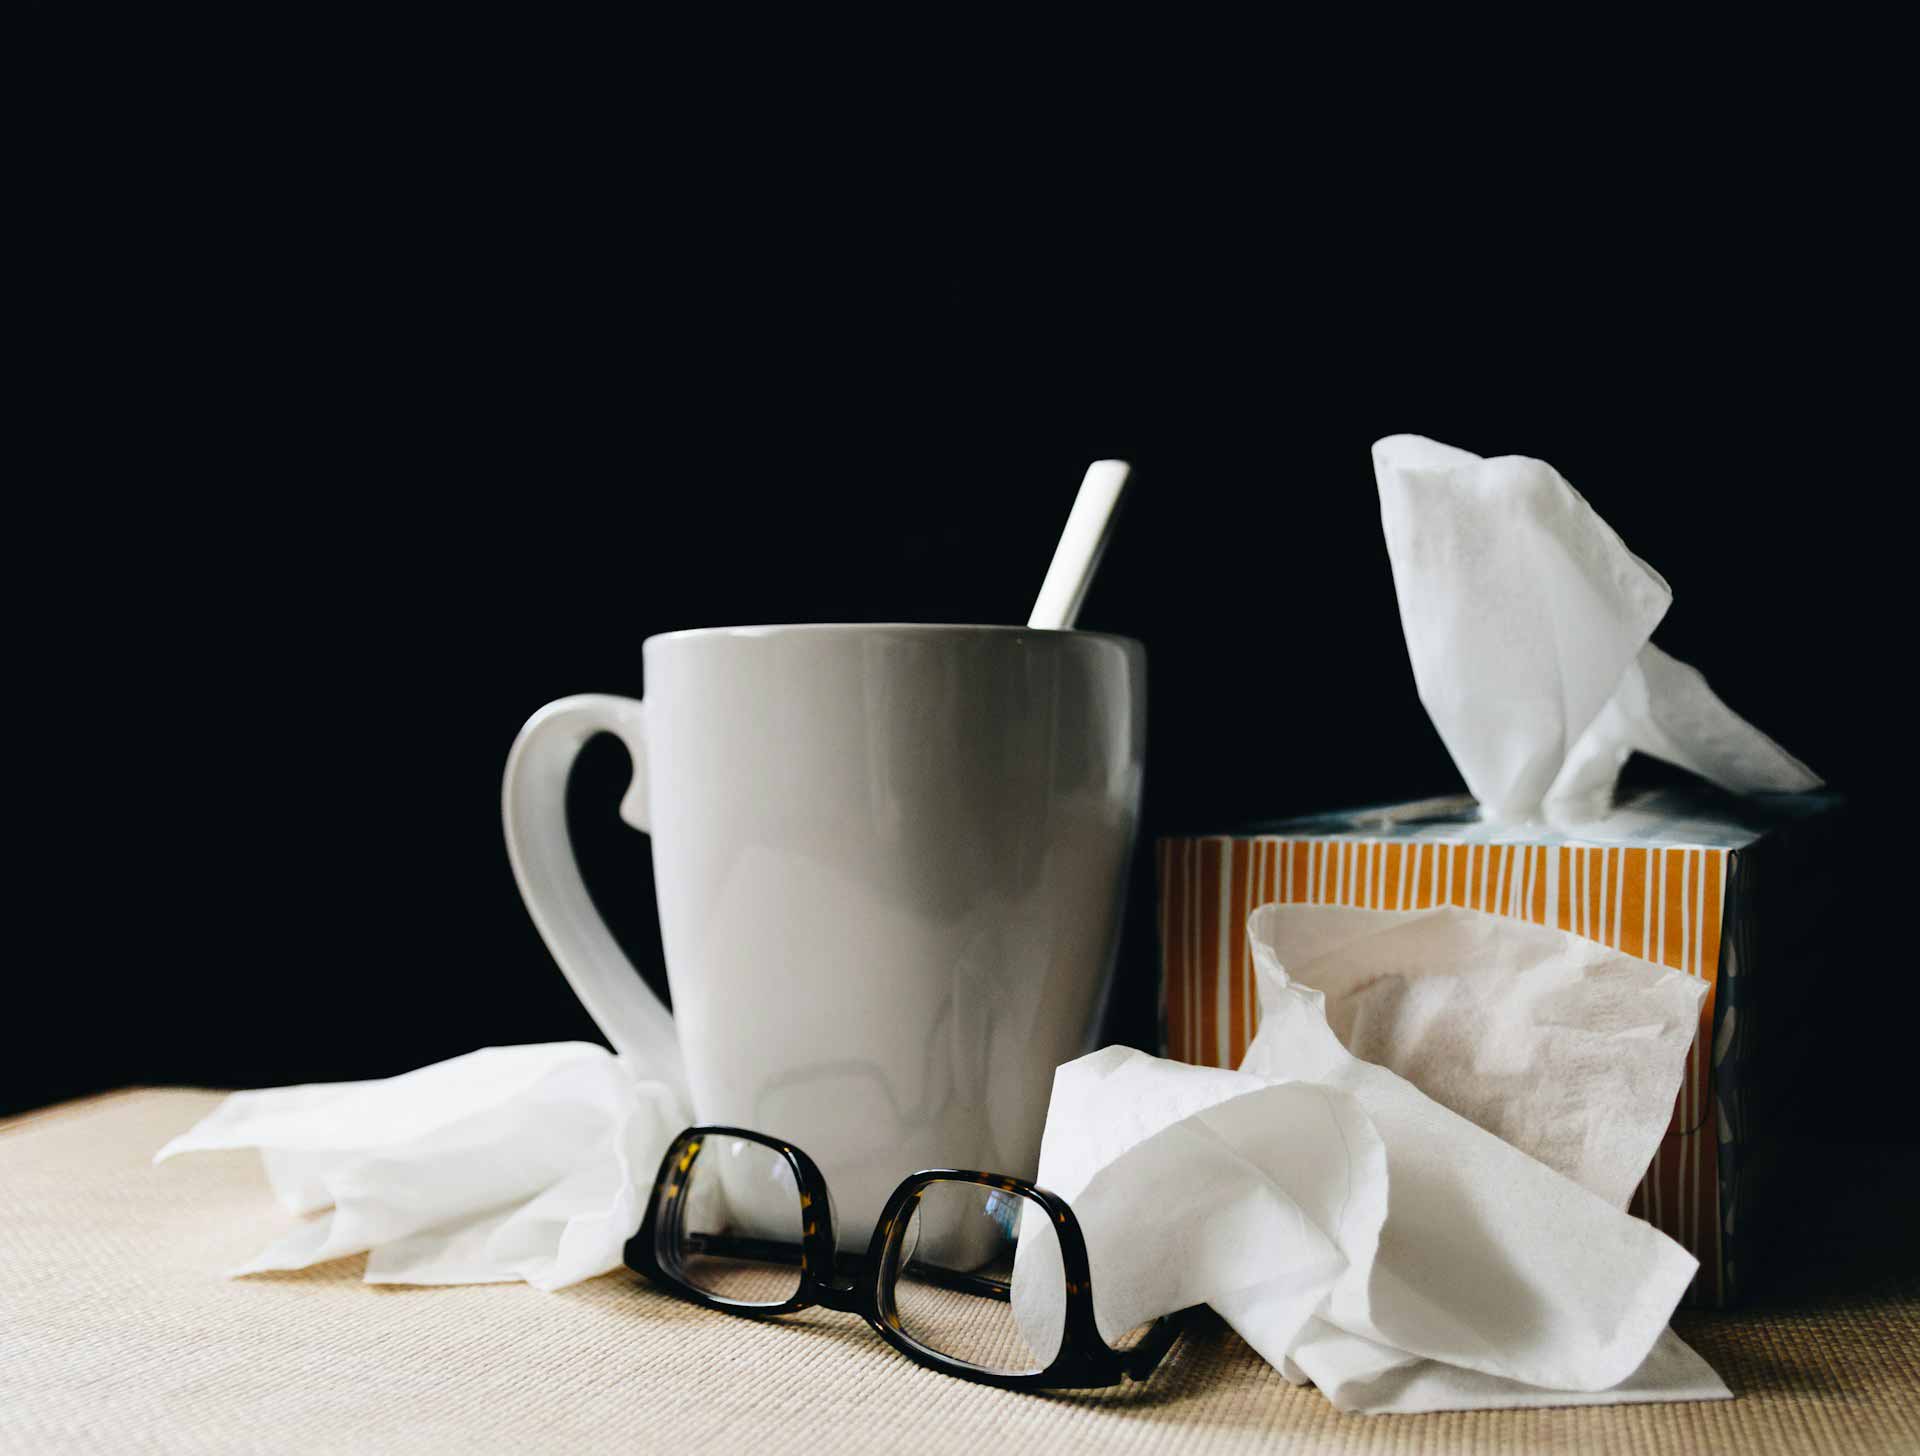 A mug of tea and a pair of glasses, sitting on a table with some crumpled up tissues